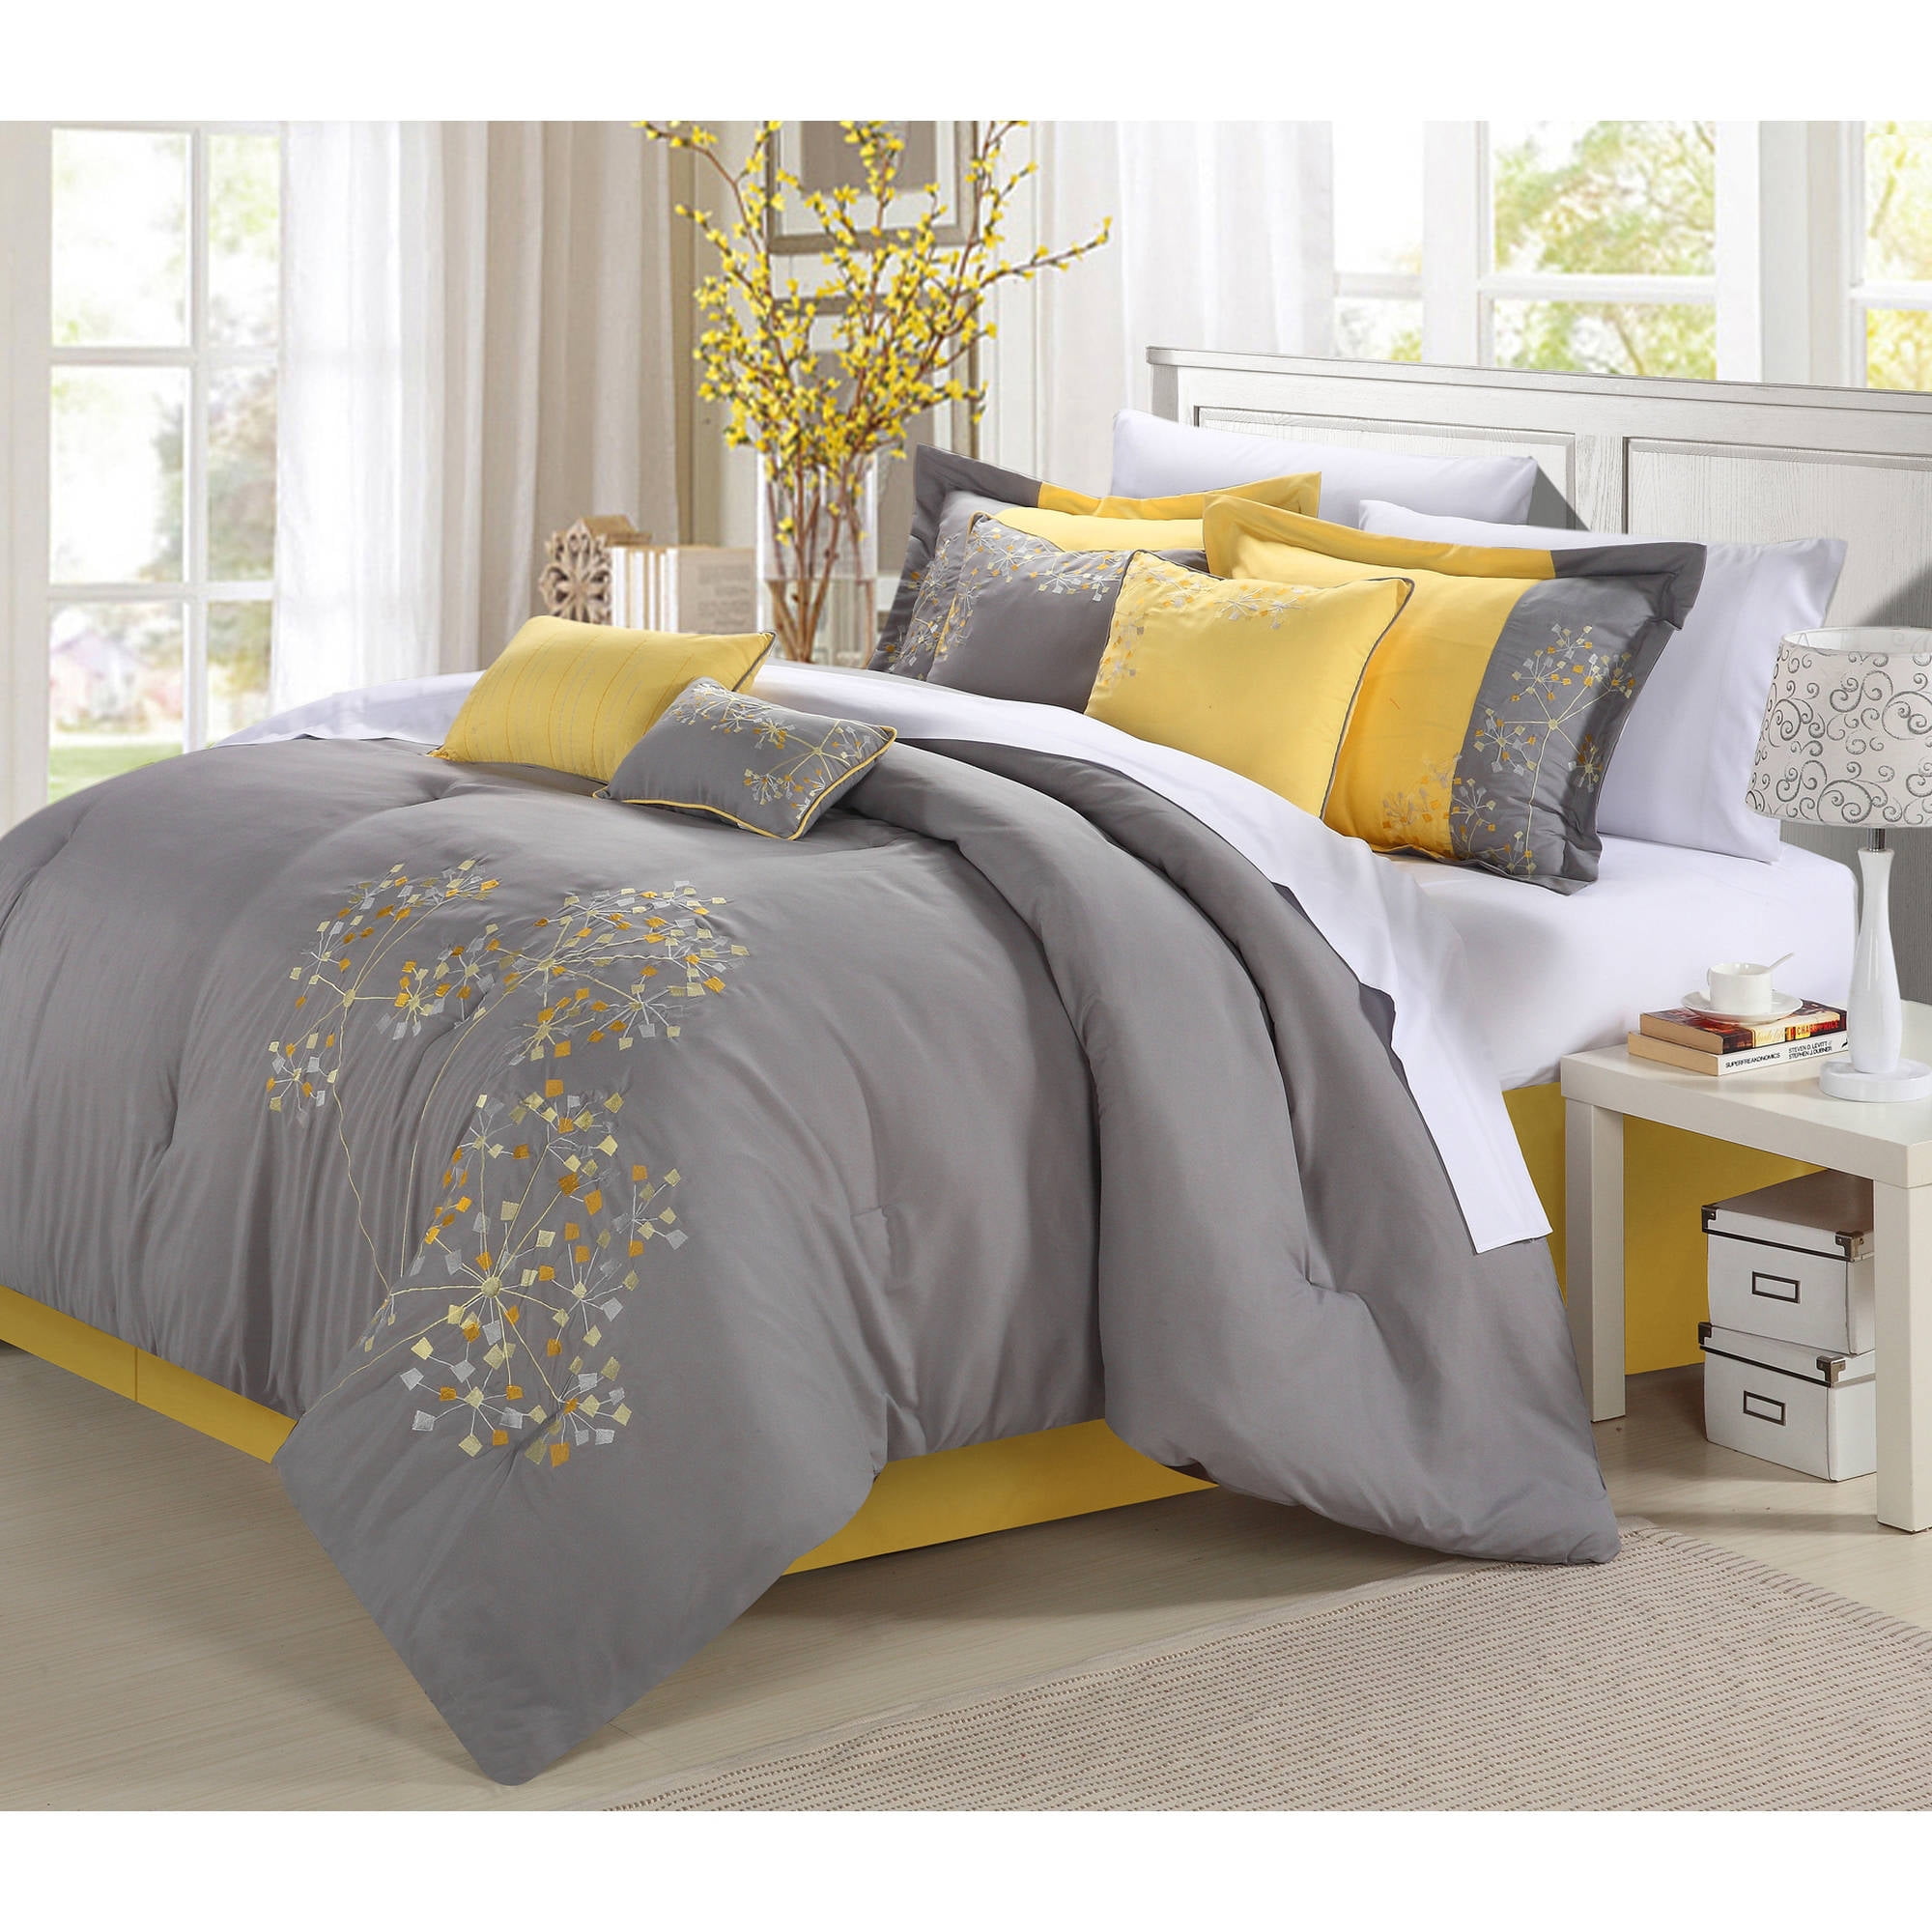 full bed comforter sets for adults